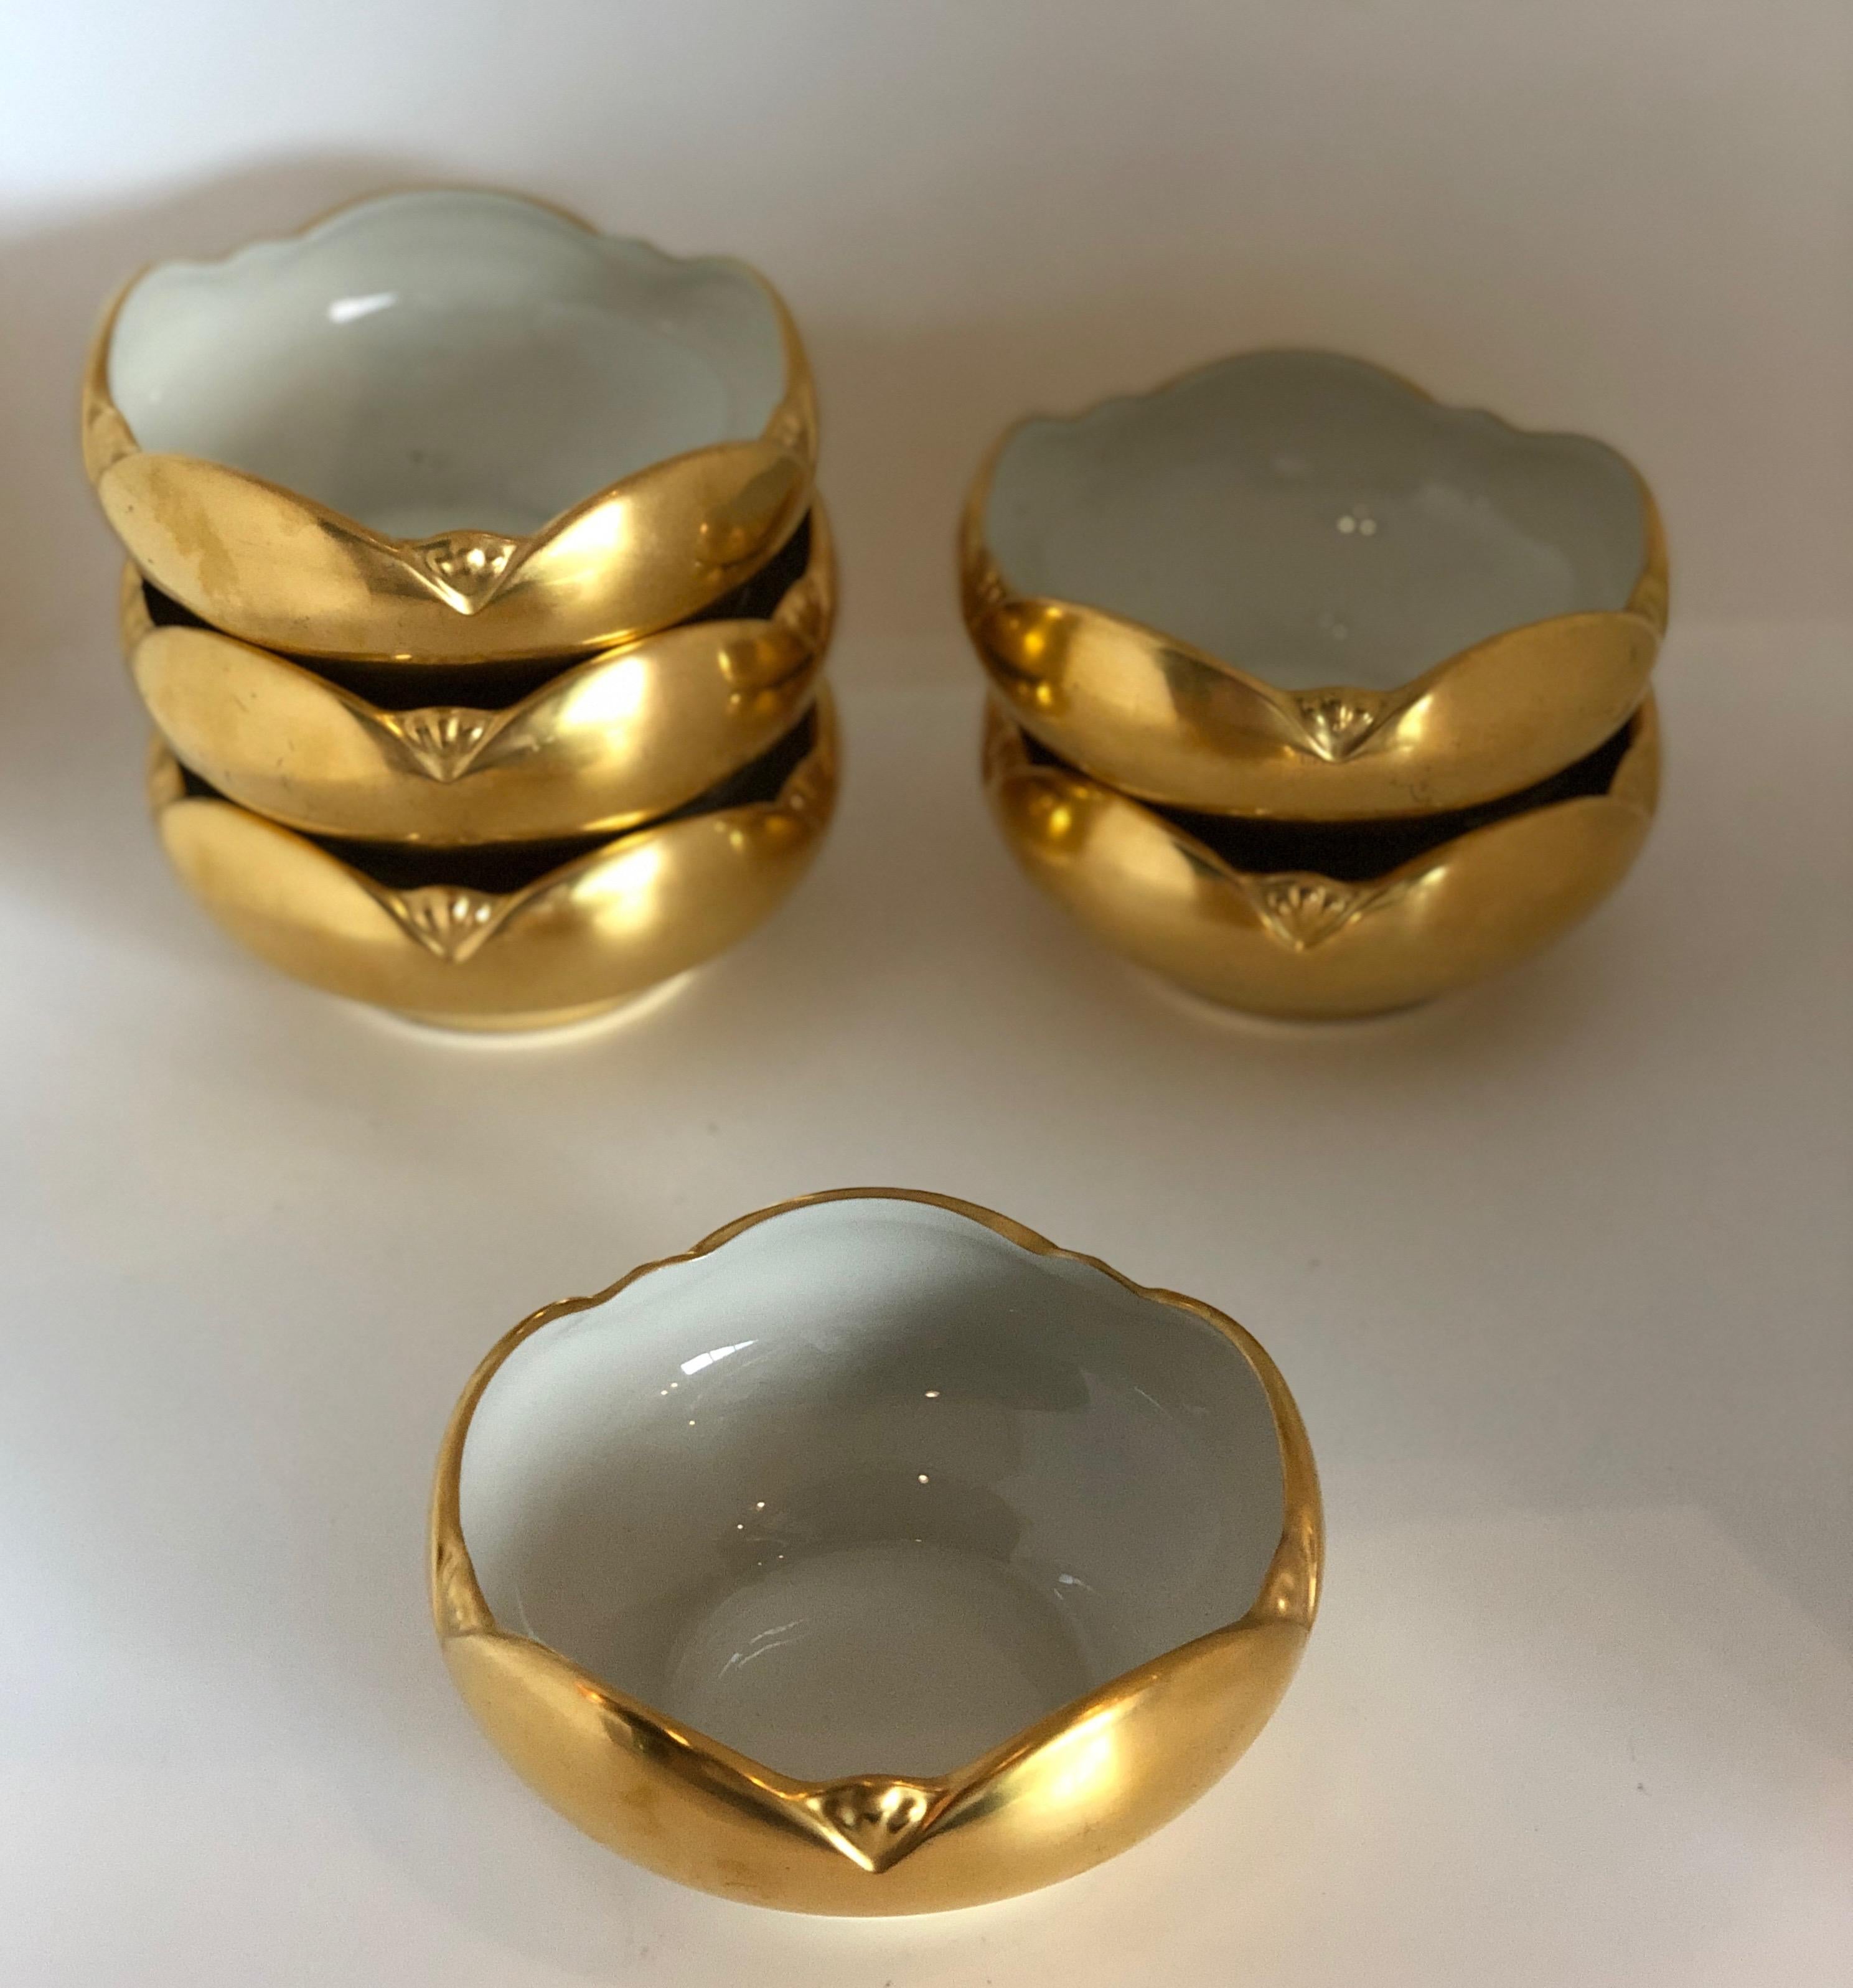 Set of 6 Picard Hand Decorated Ensemble Gold and White Interior Porcelain Bowls For Sale 2